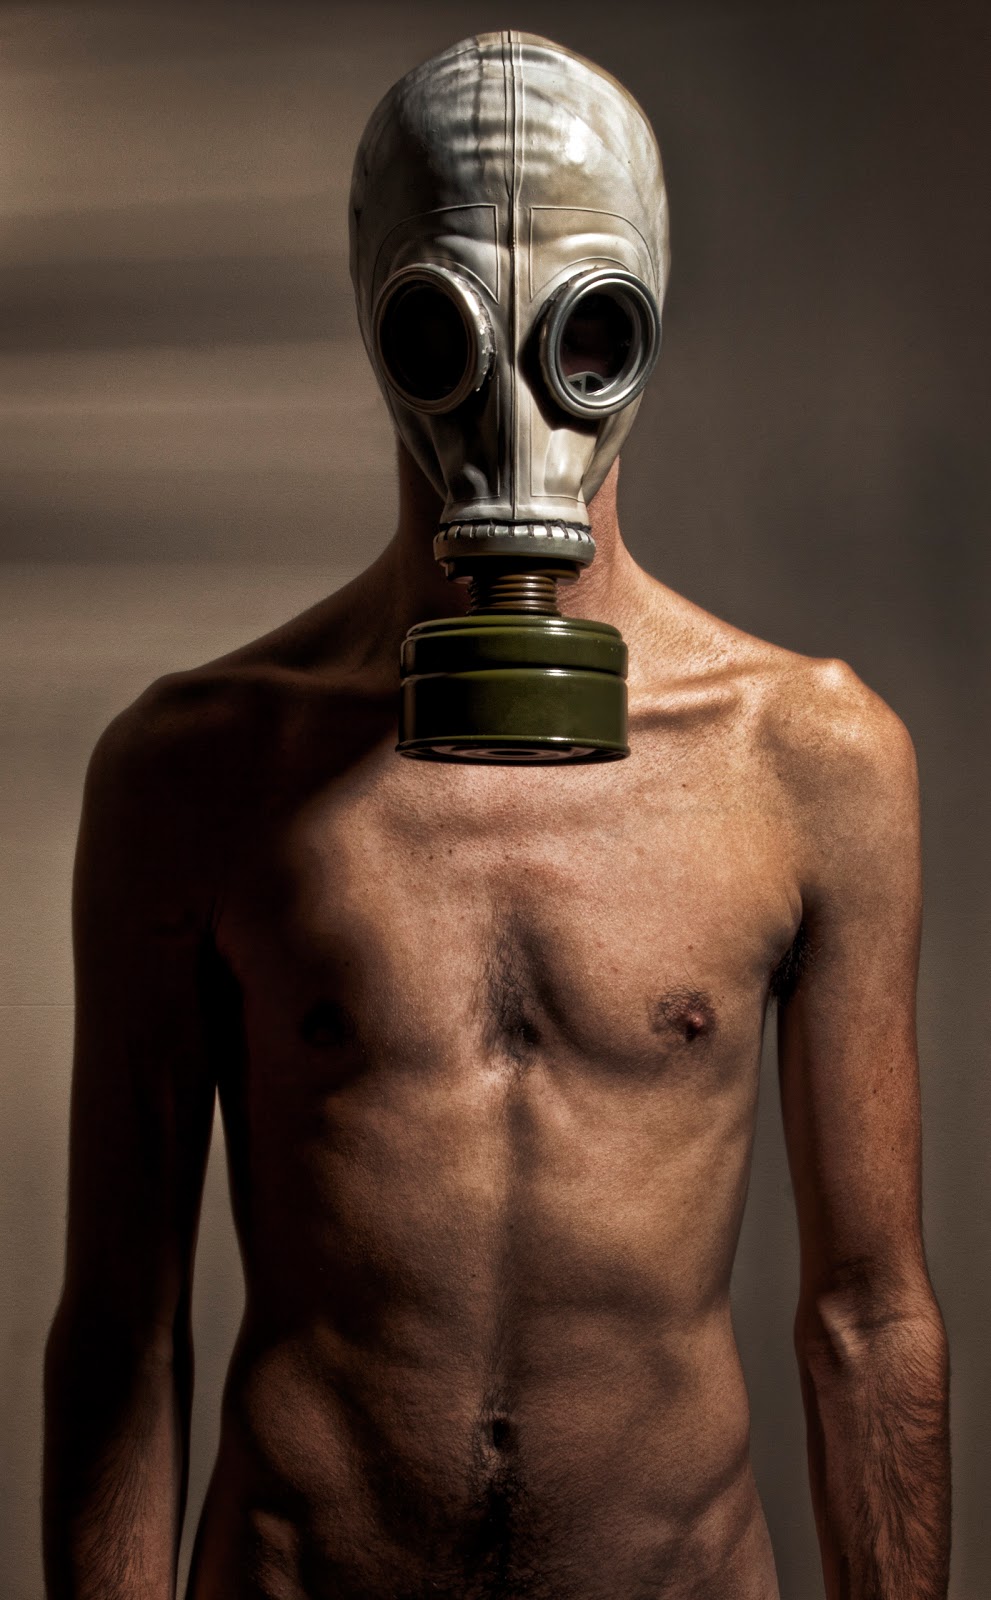 Brad Nicole Photography: Gas Mask collection round 2